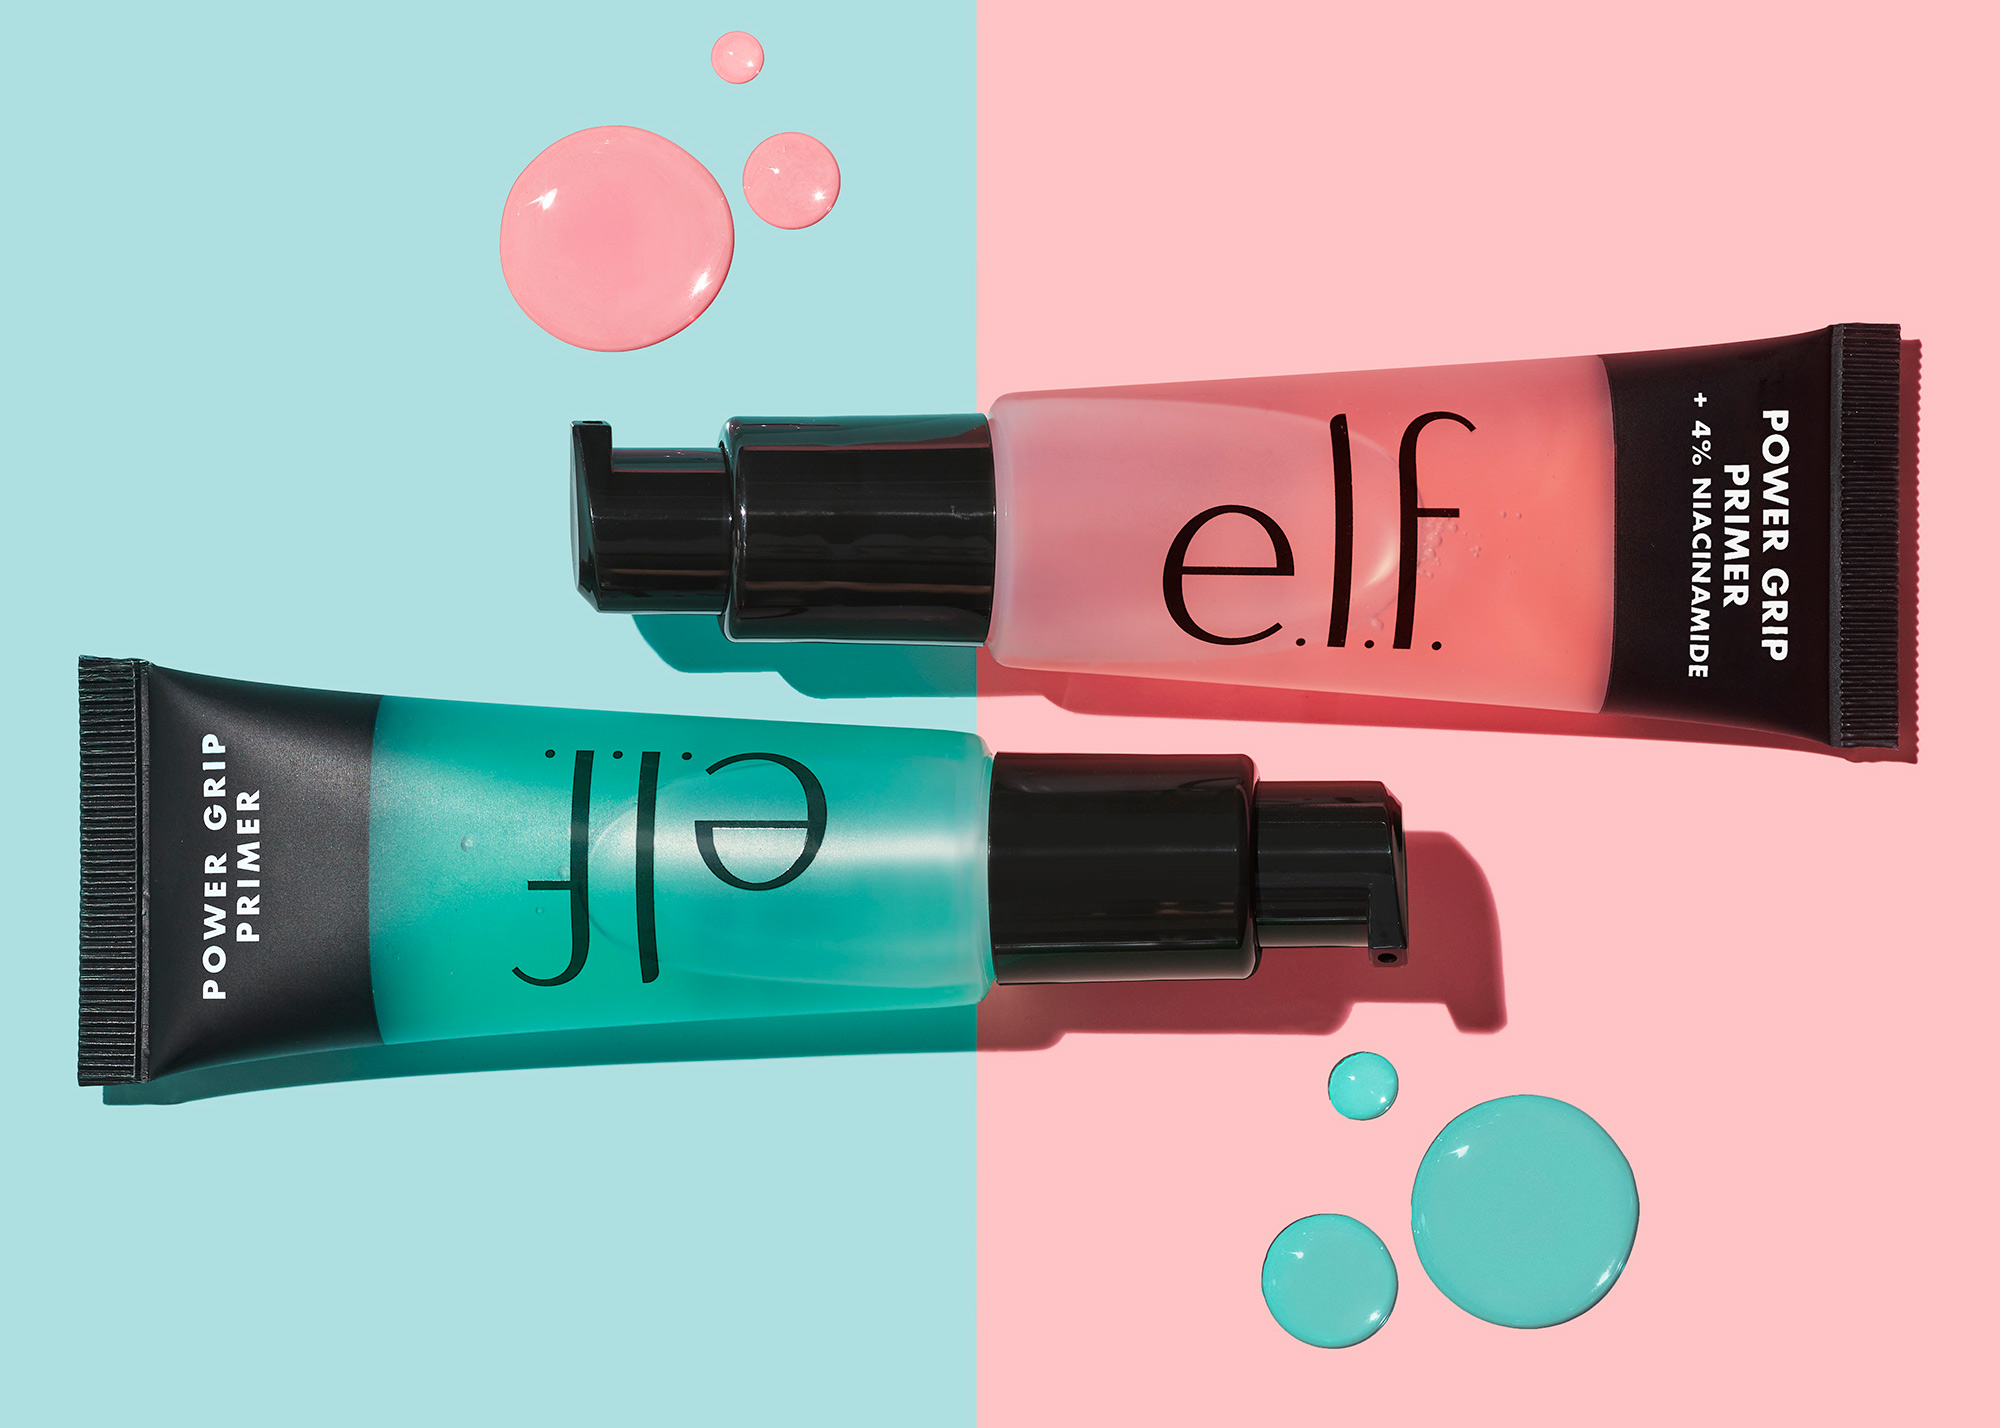 elf-cosmetics-makeup-pitches-affordable-prices-to-masses-bloomberg